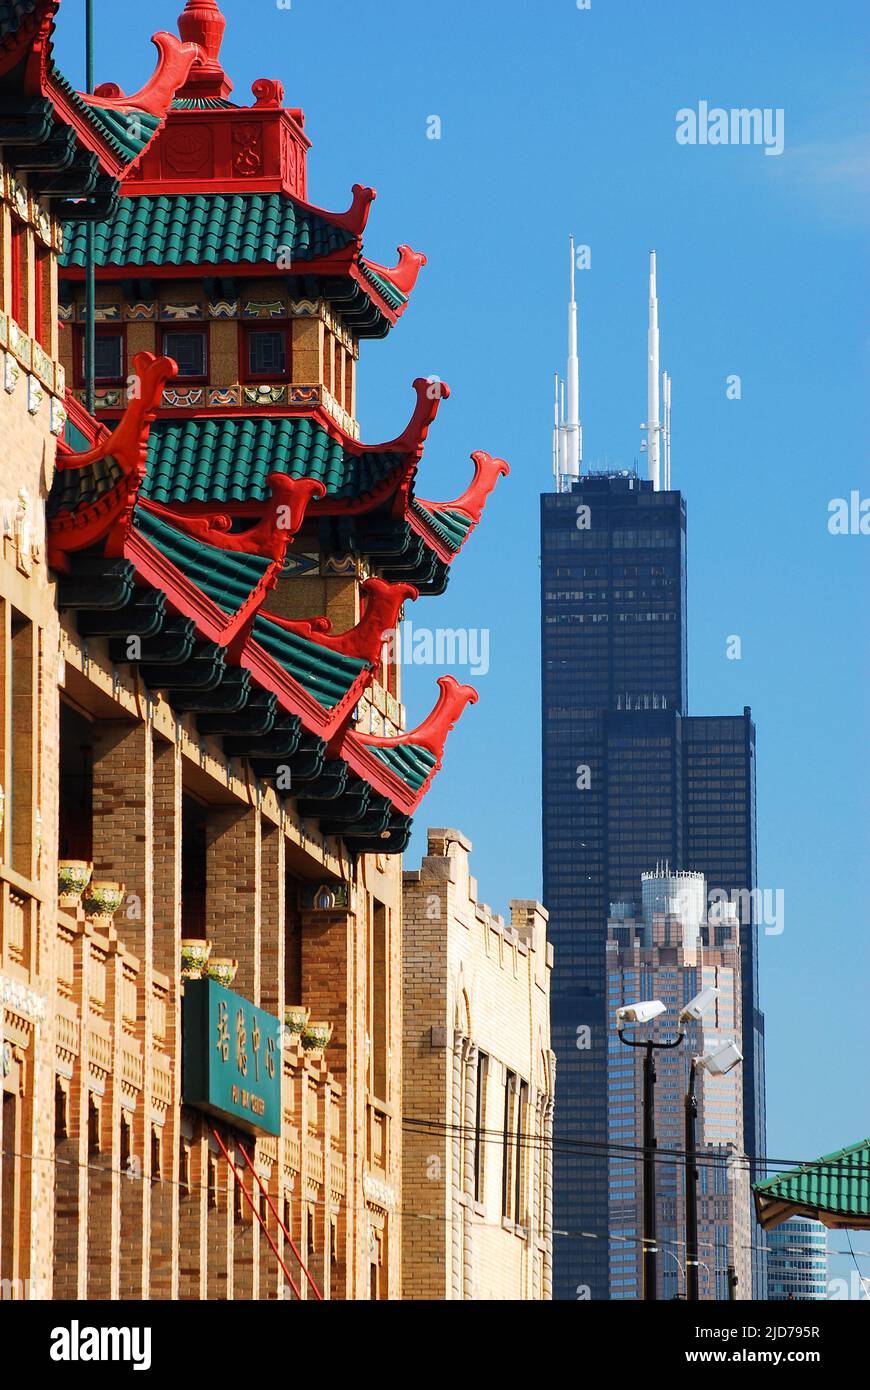 Two cultures appear to exist side by side as a Chinatown Buddhist temple is juxtaposed with the Willis Tower in Chicago Stock Photo